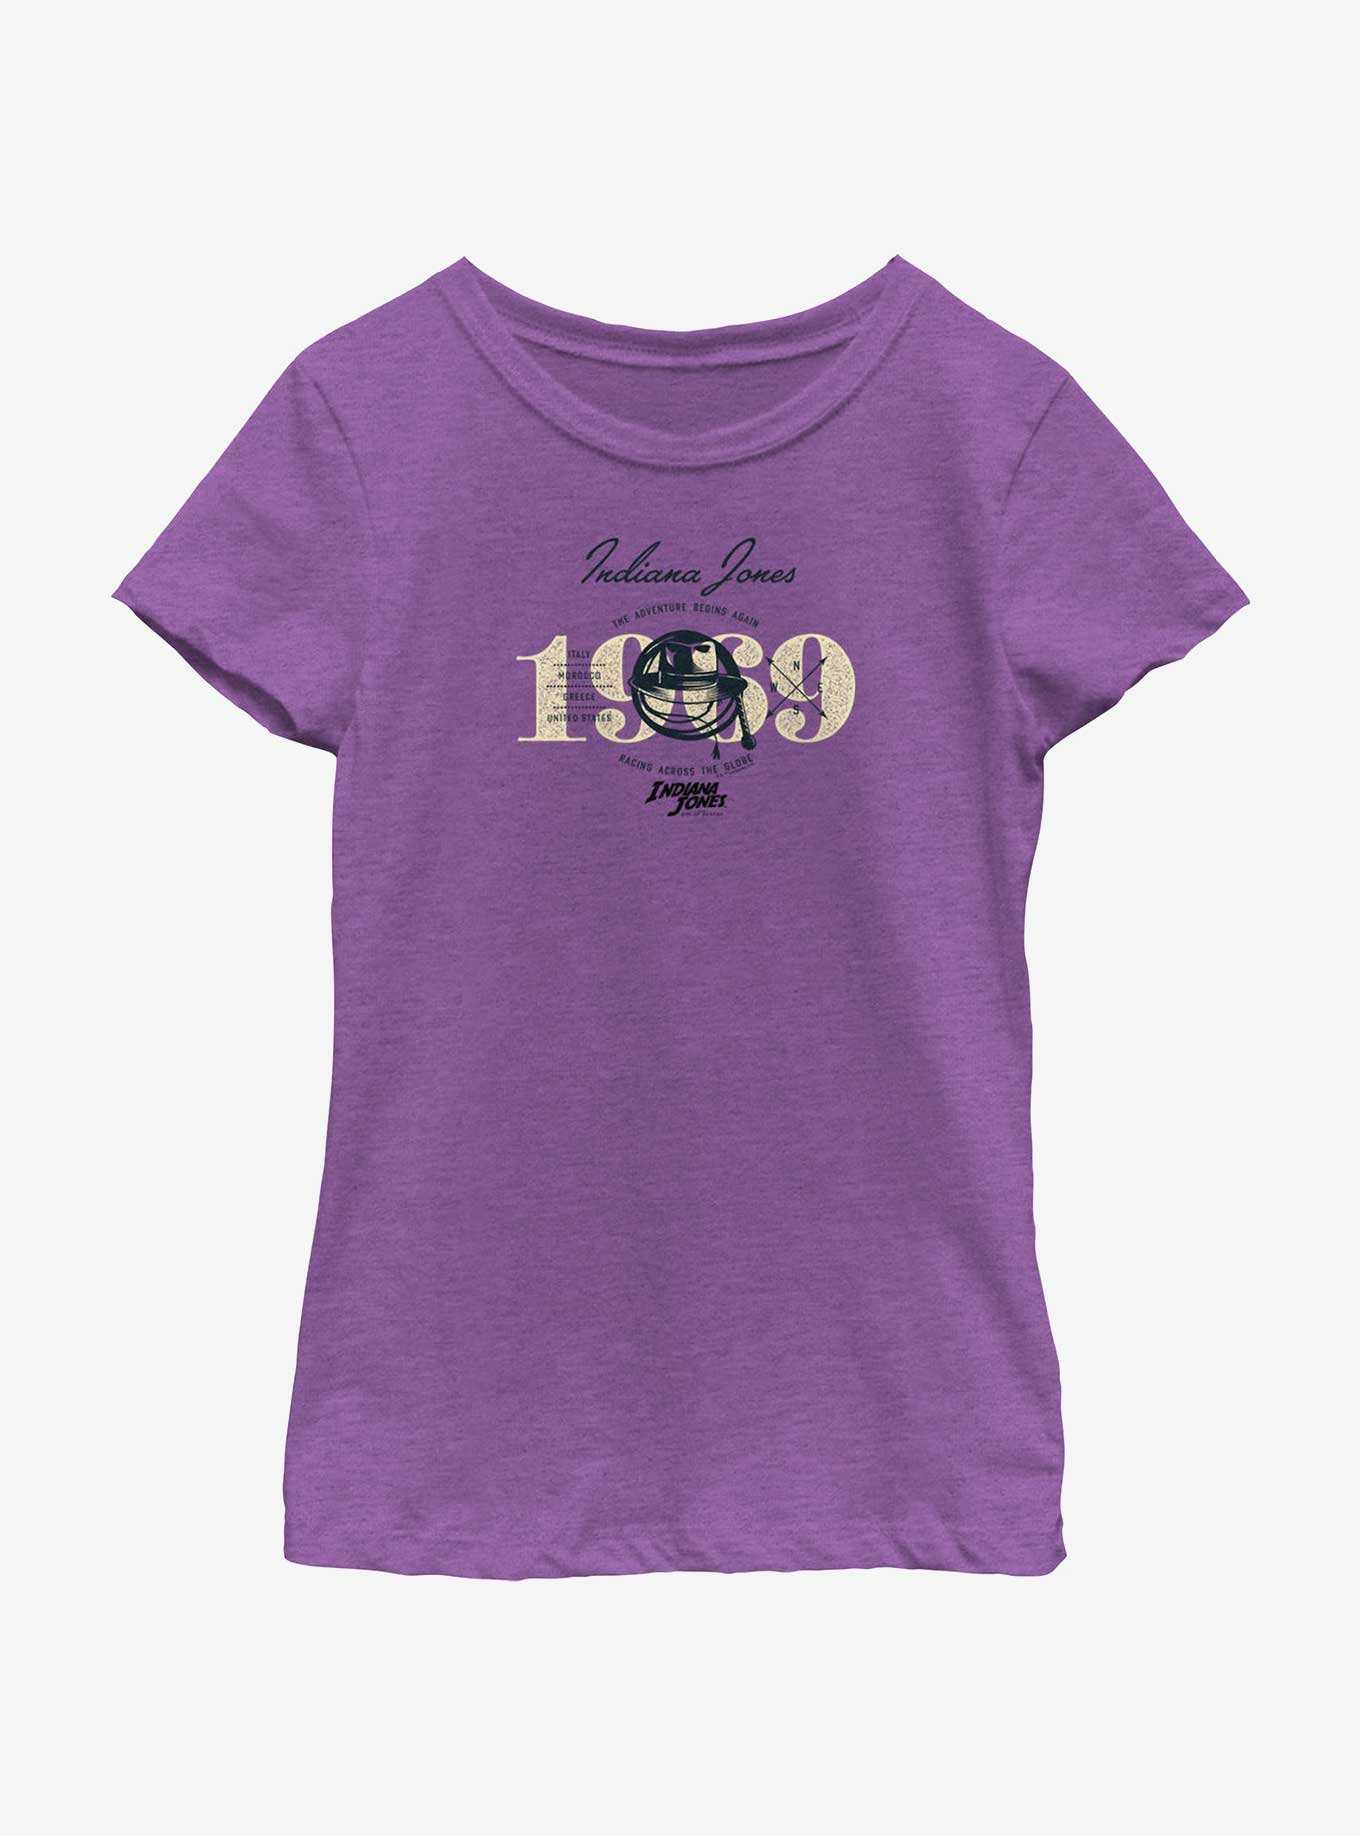 Indiana Jones and the Dial of Destiny 1969 Adventure Begins Again Girls Youth T-Shirt, , hi-res